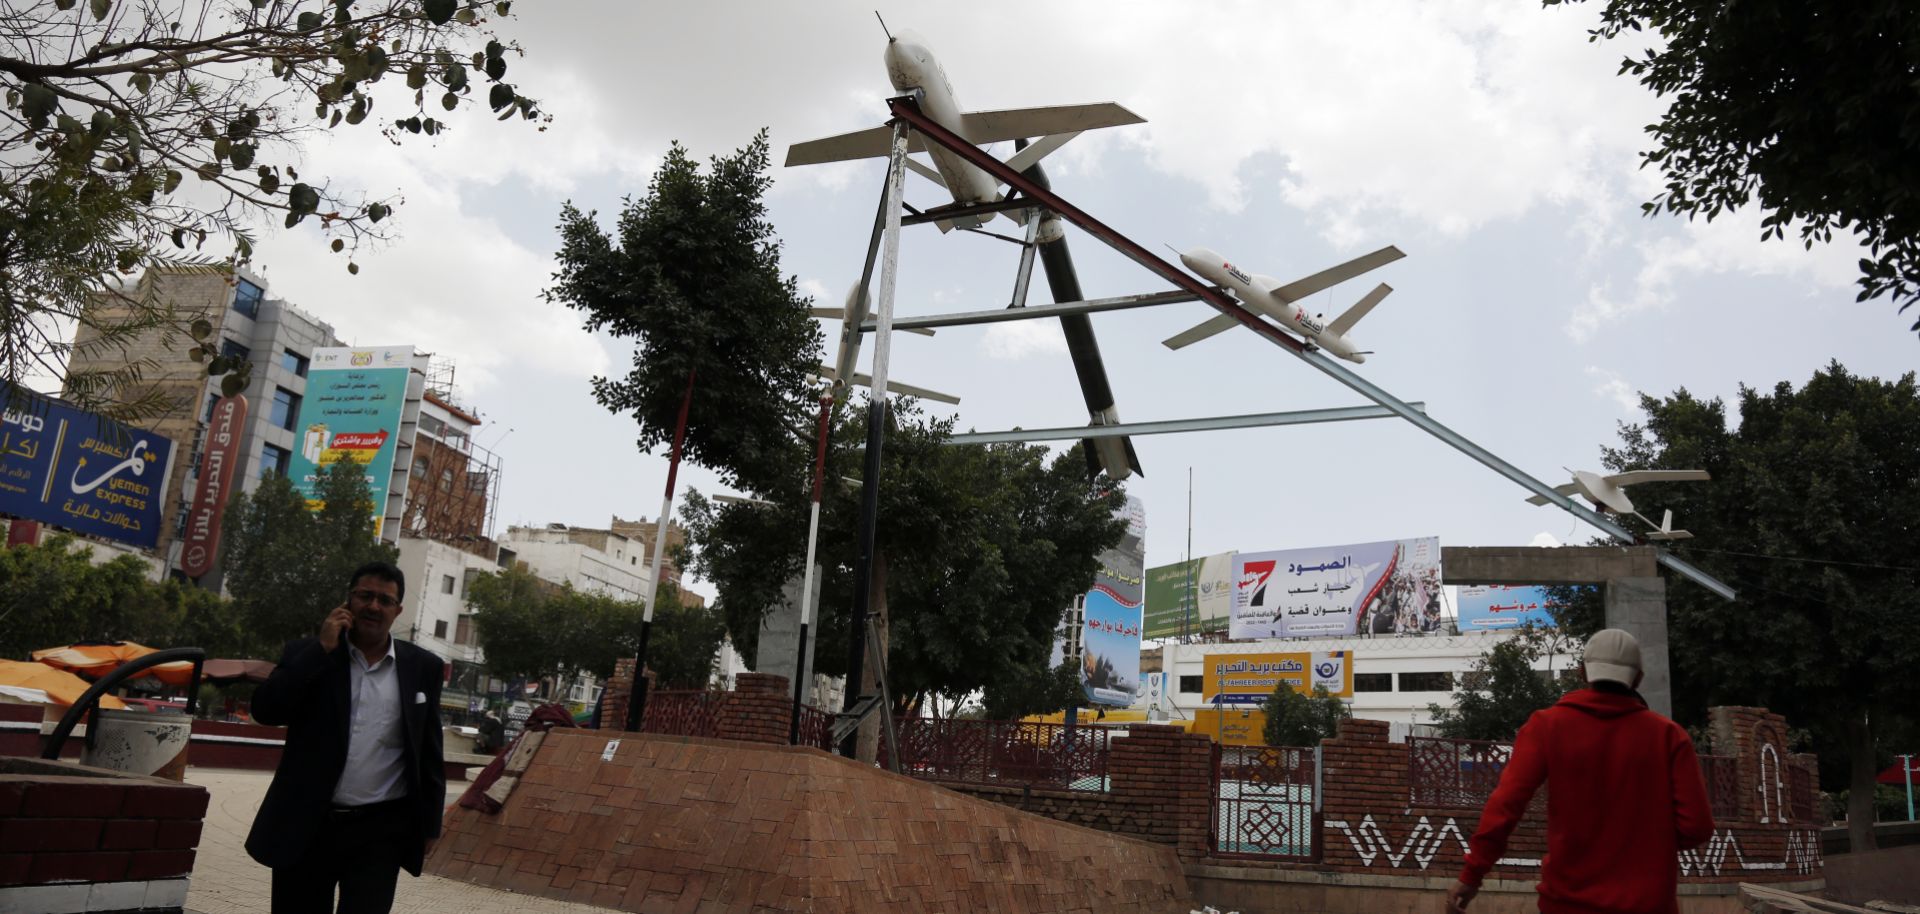 A photo taken in Sanaa, Yemen, on March 21, 2022, shows people walking under mock drones and missiles set up by supporters of the country's Iran-aligned Houthi movement, which earlier conducted attacks against Saudi energy facilities.